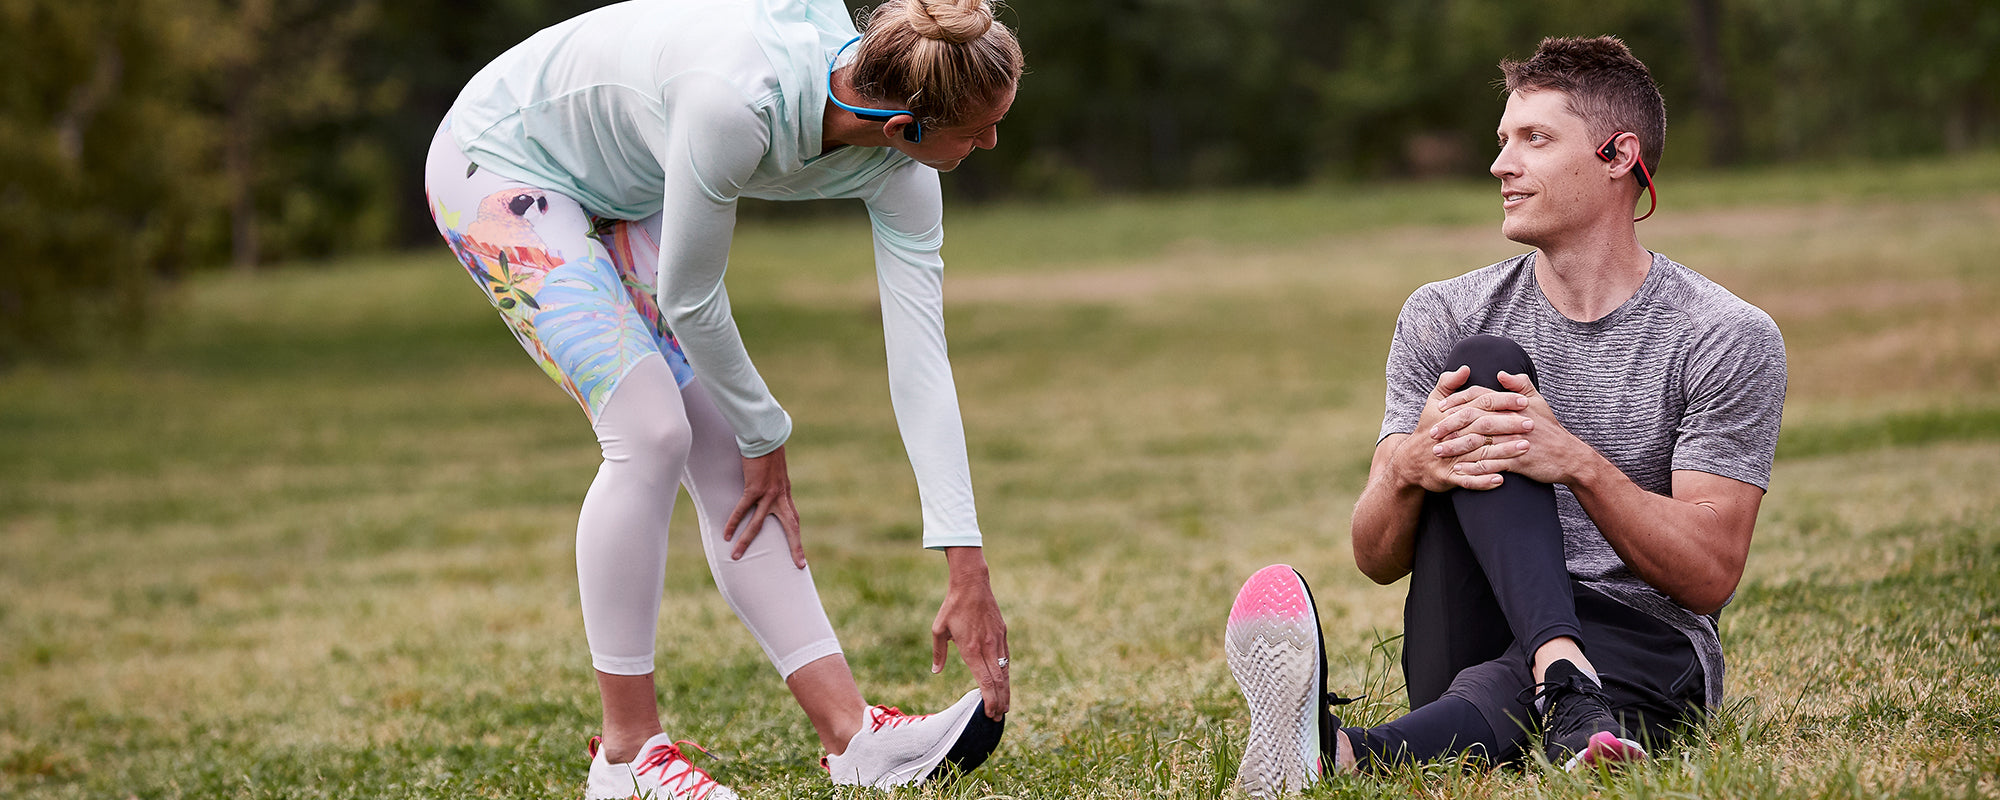 4 Ways to Get Back to Running After an Injury